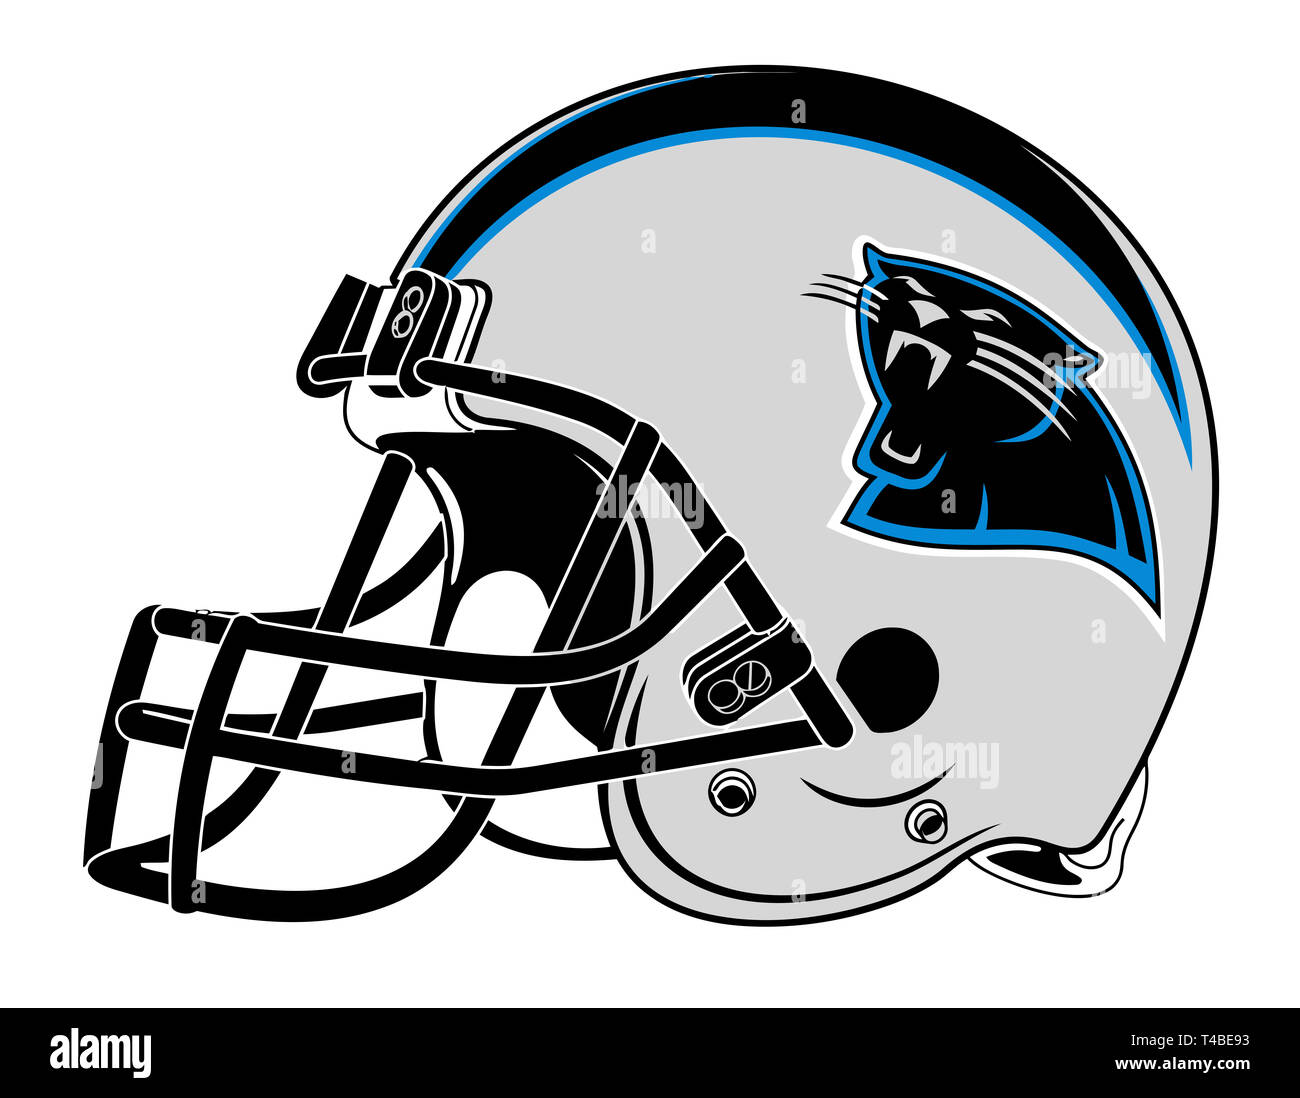 Nfc south division Cut Out Stock Images & Pictures - Alamy